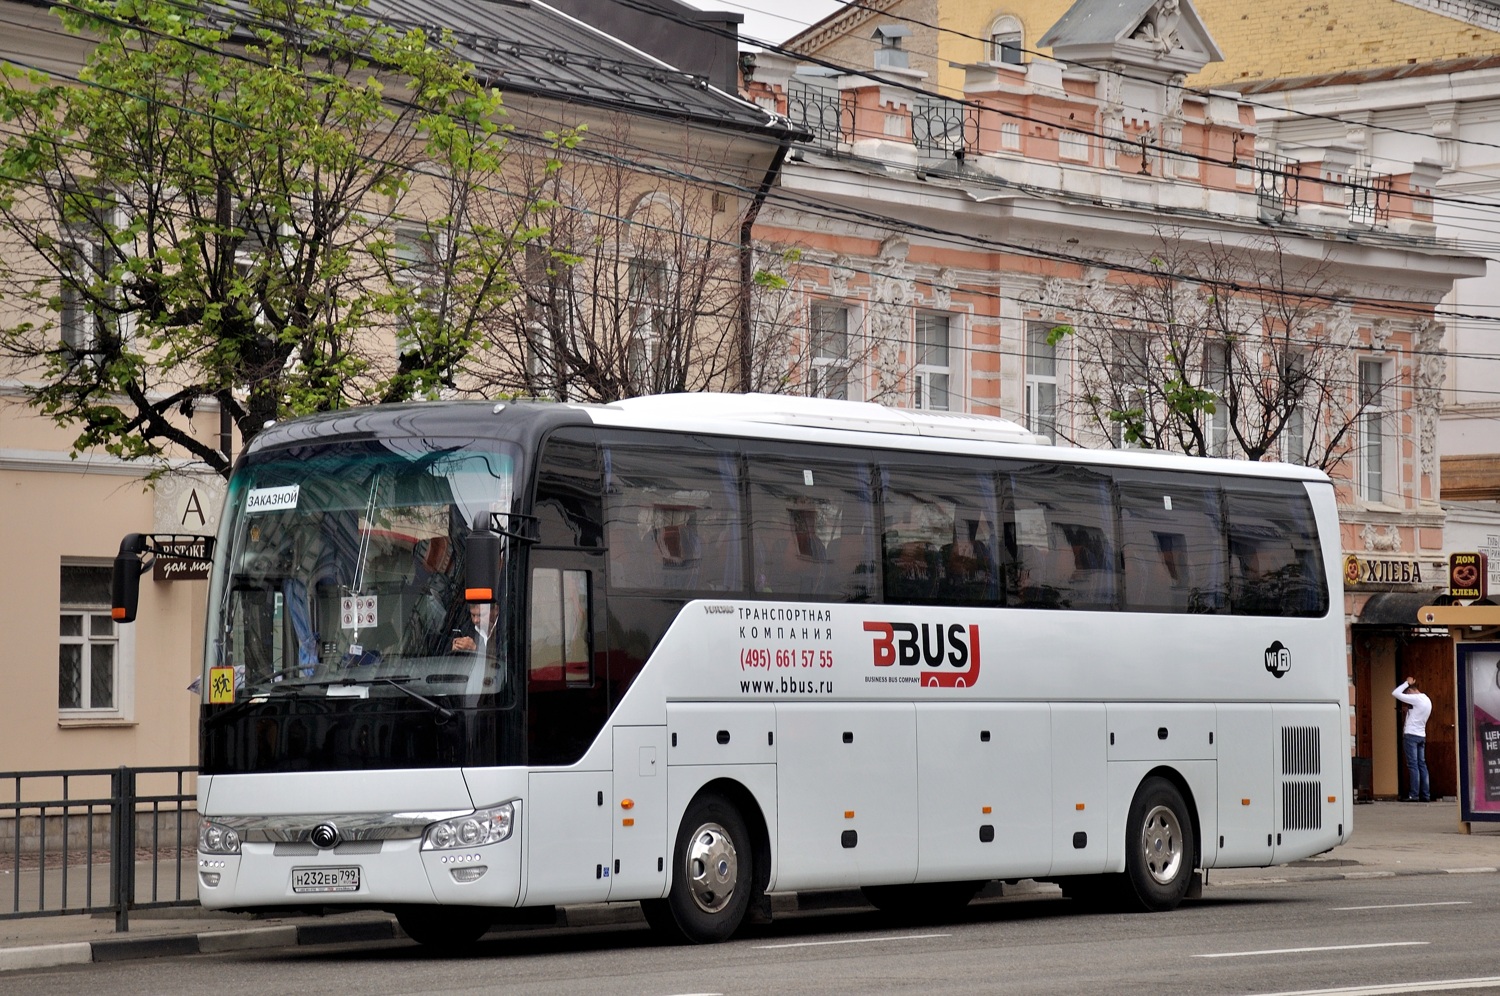 Moscow, Yutong ZK6122H9 # Н 232 ЕВ 799